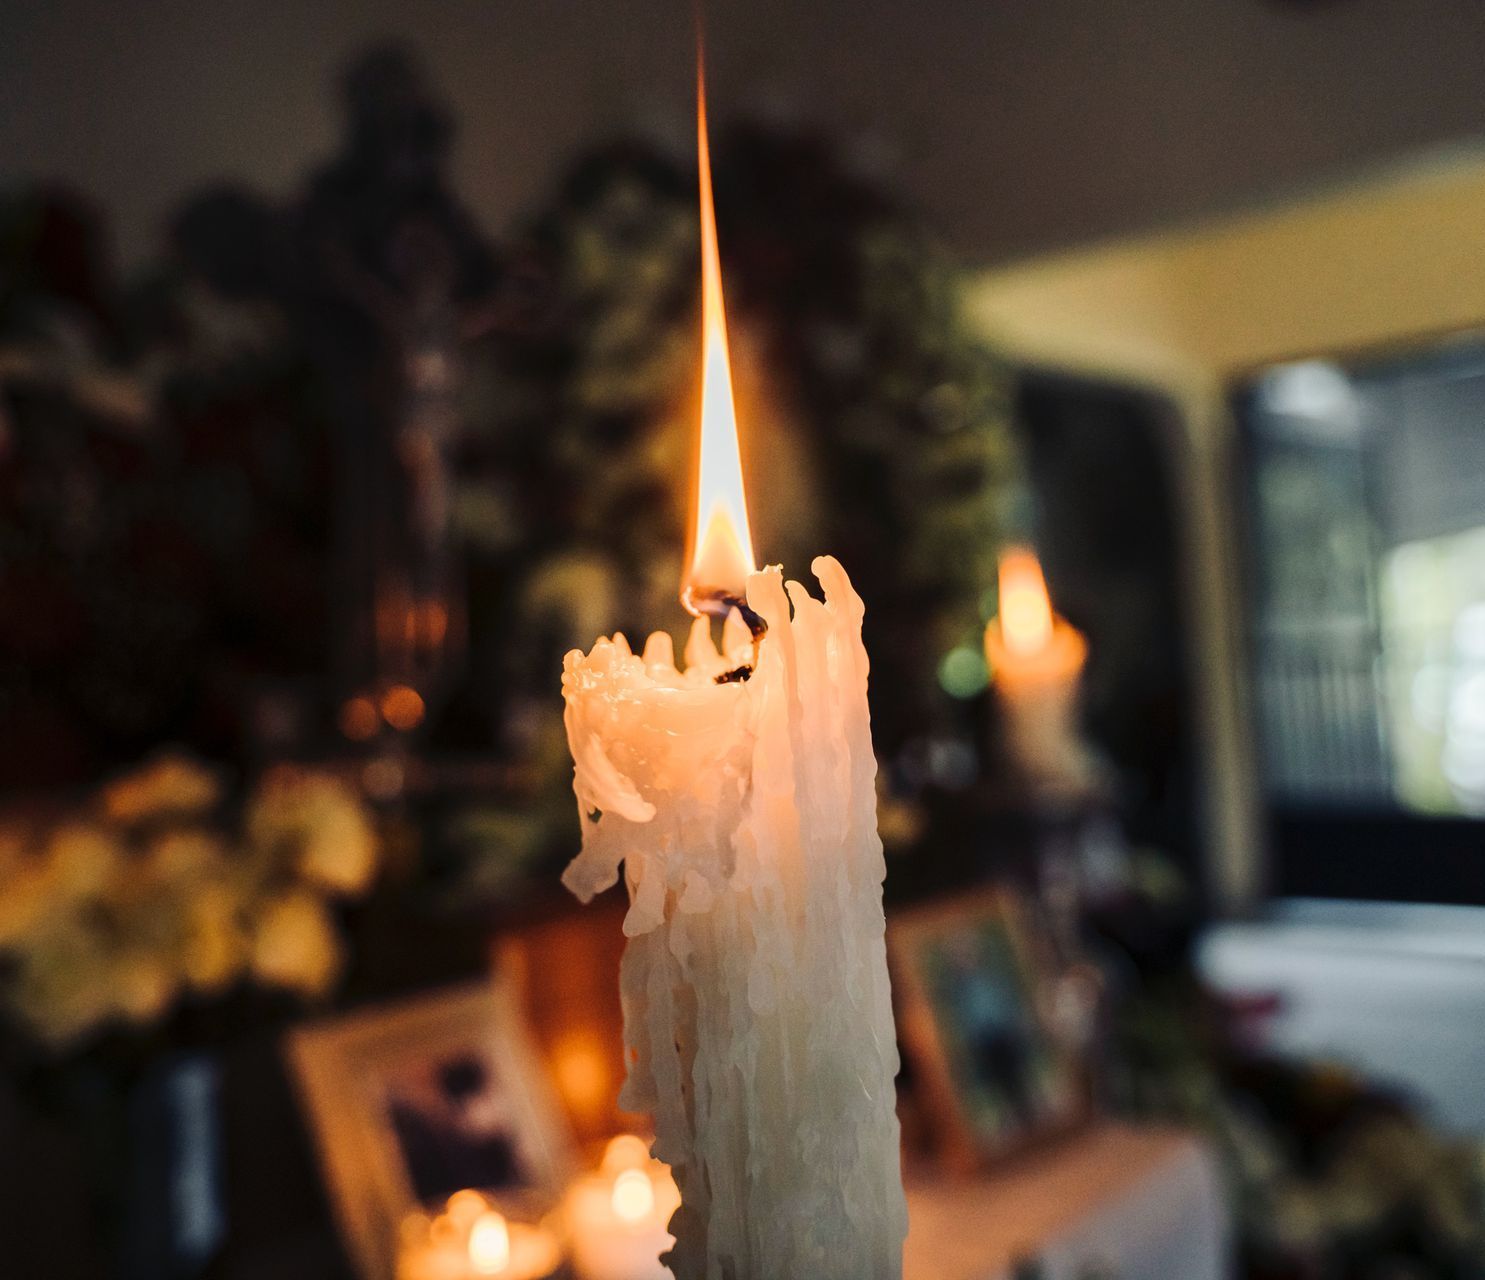 A close up of a lit candle in a dark room